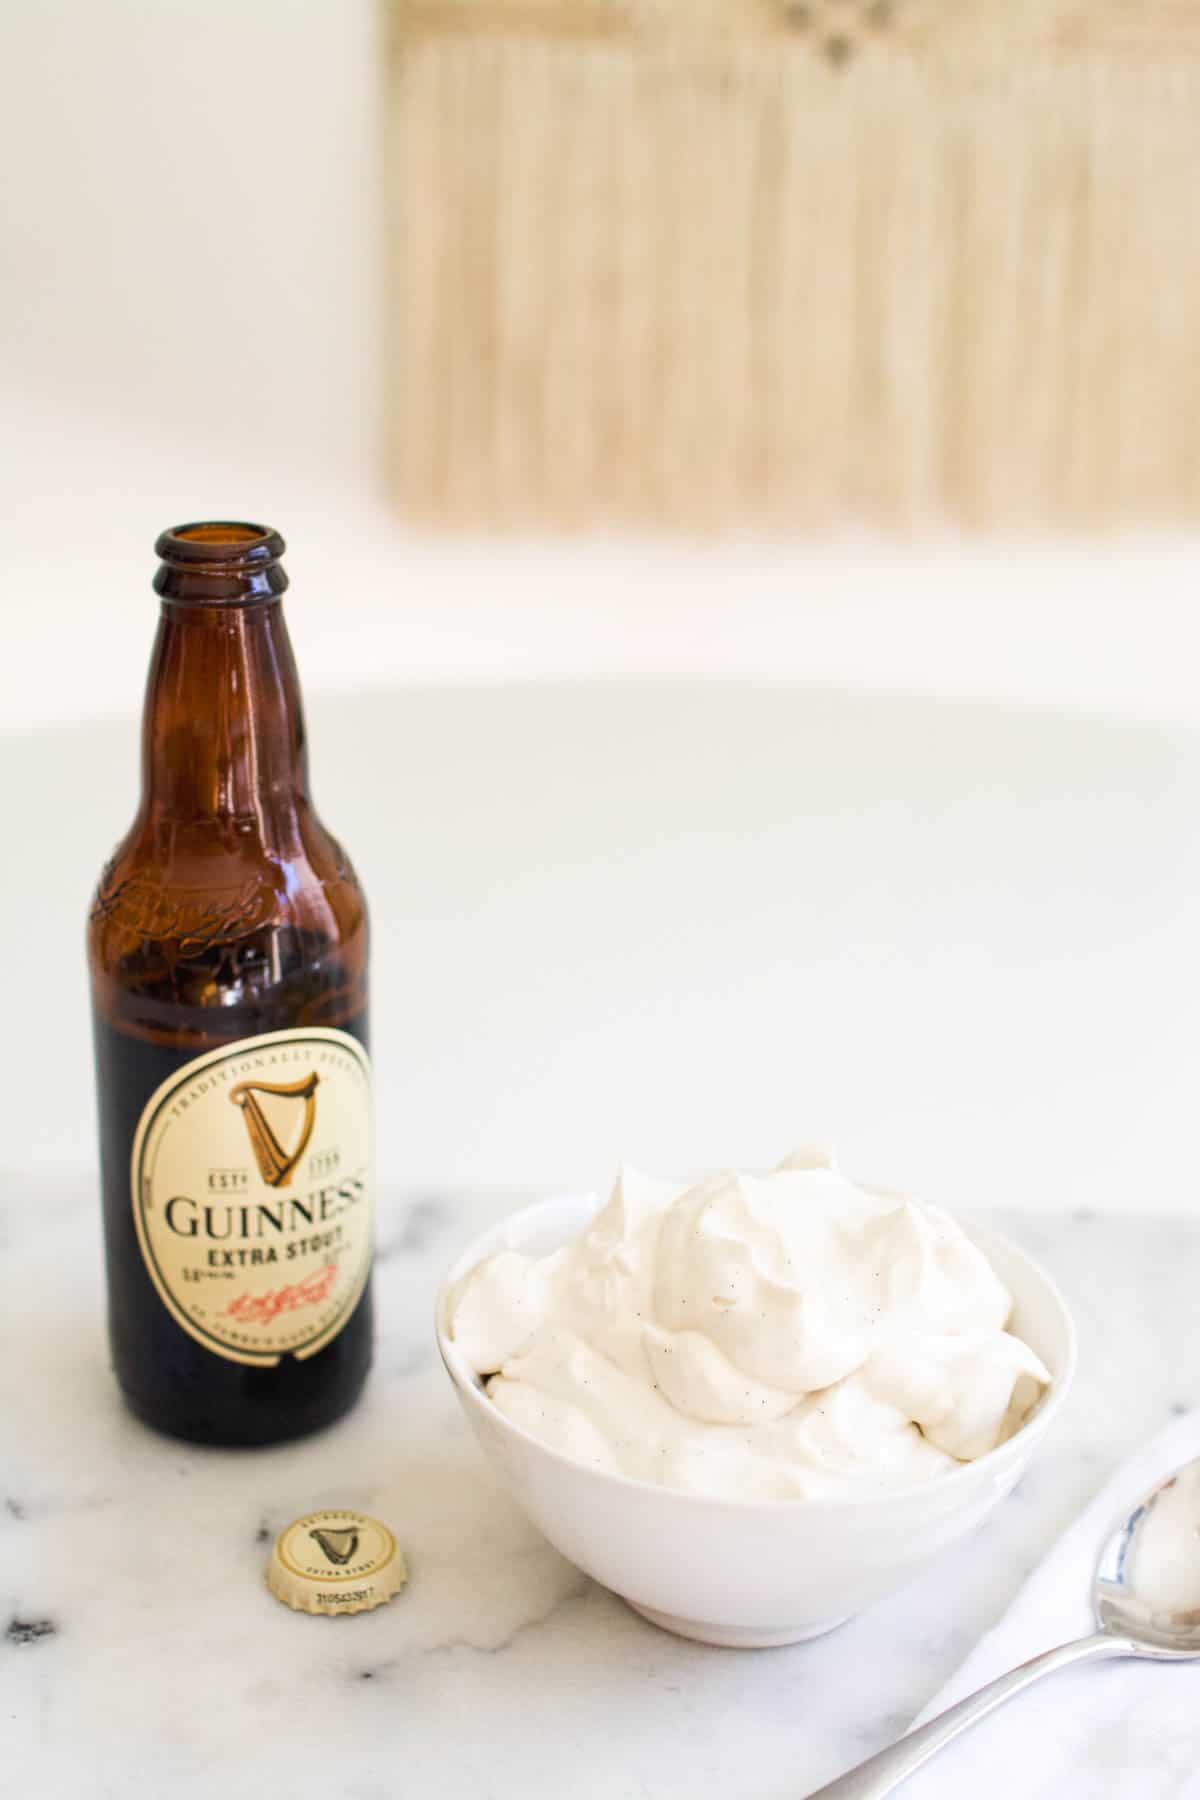 Close up of a bottle of Guinness on a counter next to a bowl of beer flavored whipped cream.